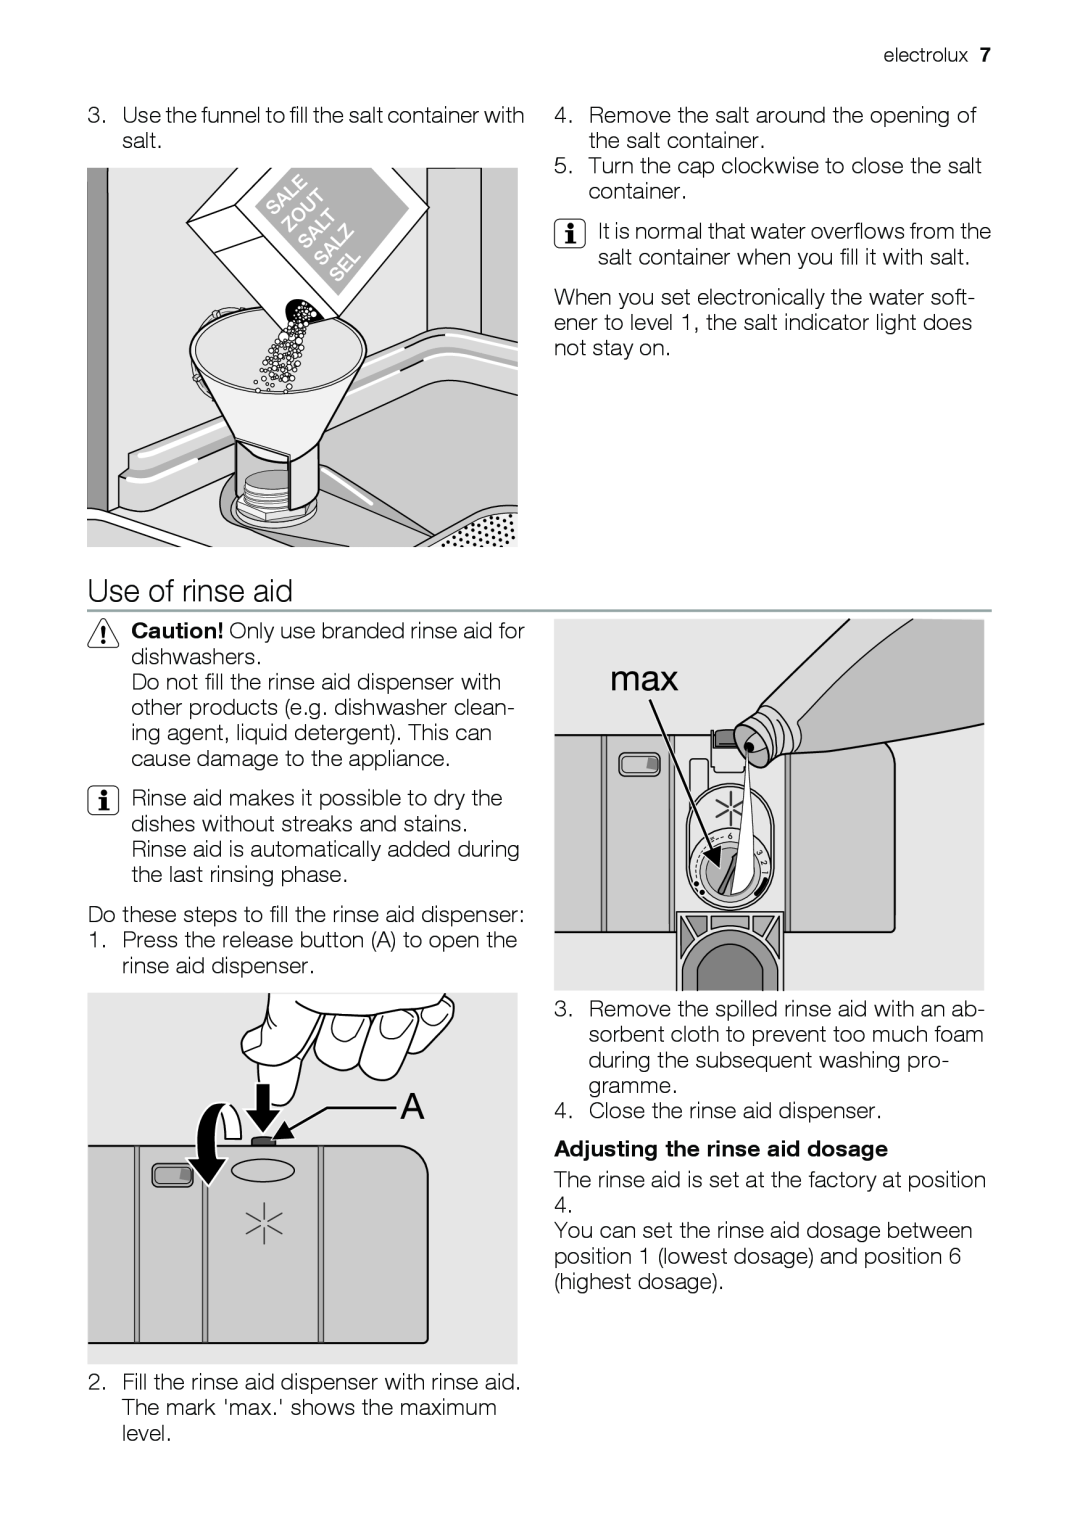 Epson ESL63010 user manual Use of rinse aid, Adjusting the rinse aid dosage 